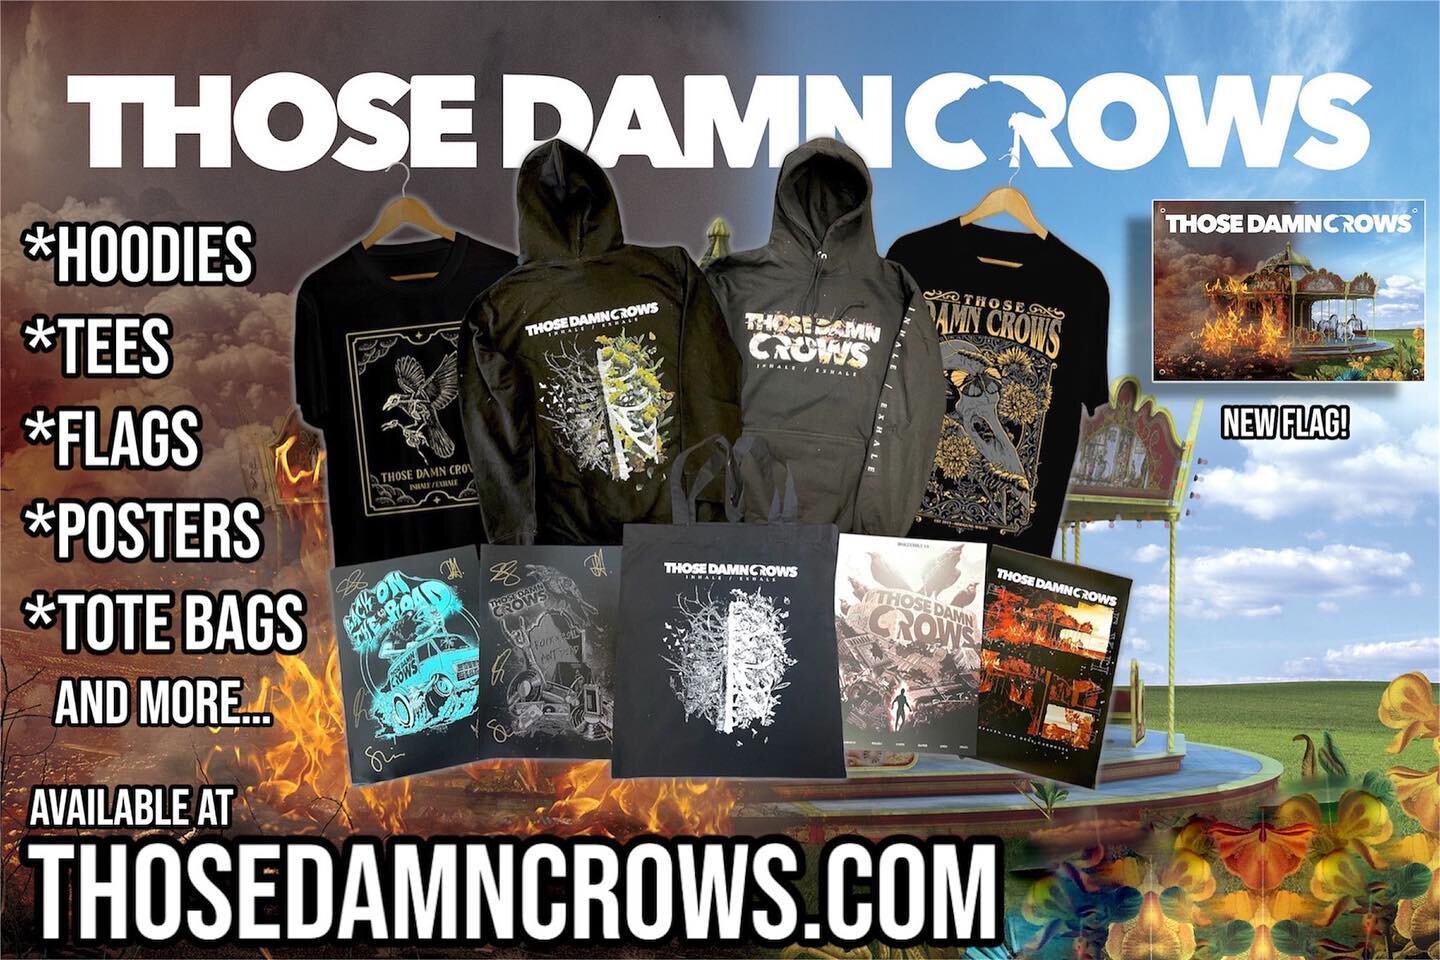 🚨 TOUR MERCH NOW ONLINE!!! 🚨 

A limited amount of leftover tour merchandise is now only for a limited time only, as well as a BRAND NEW flag design 🔥 

Get in quick before it&rsquo;s gone 👇🏻 

www.thosedamncrows.com (follow the link in our bio)